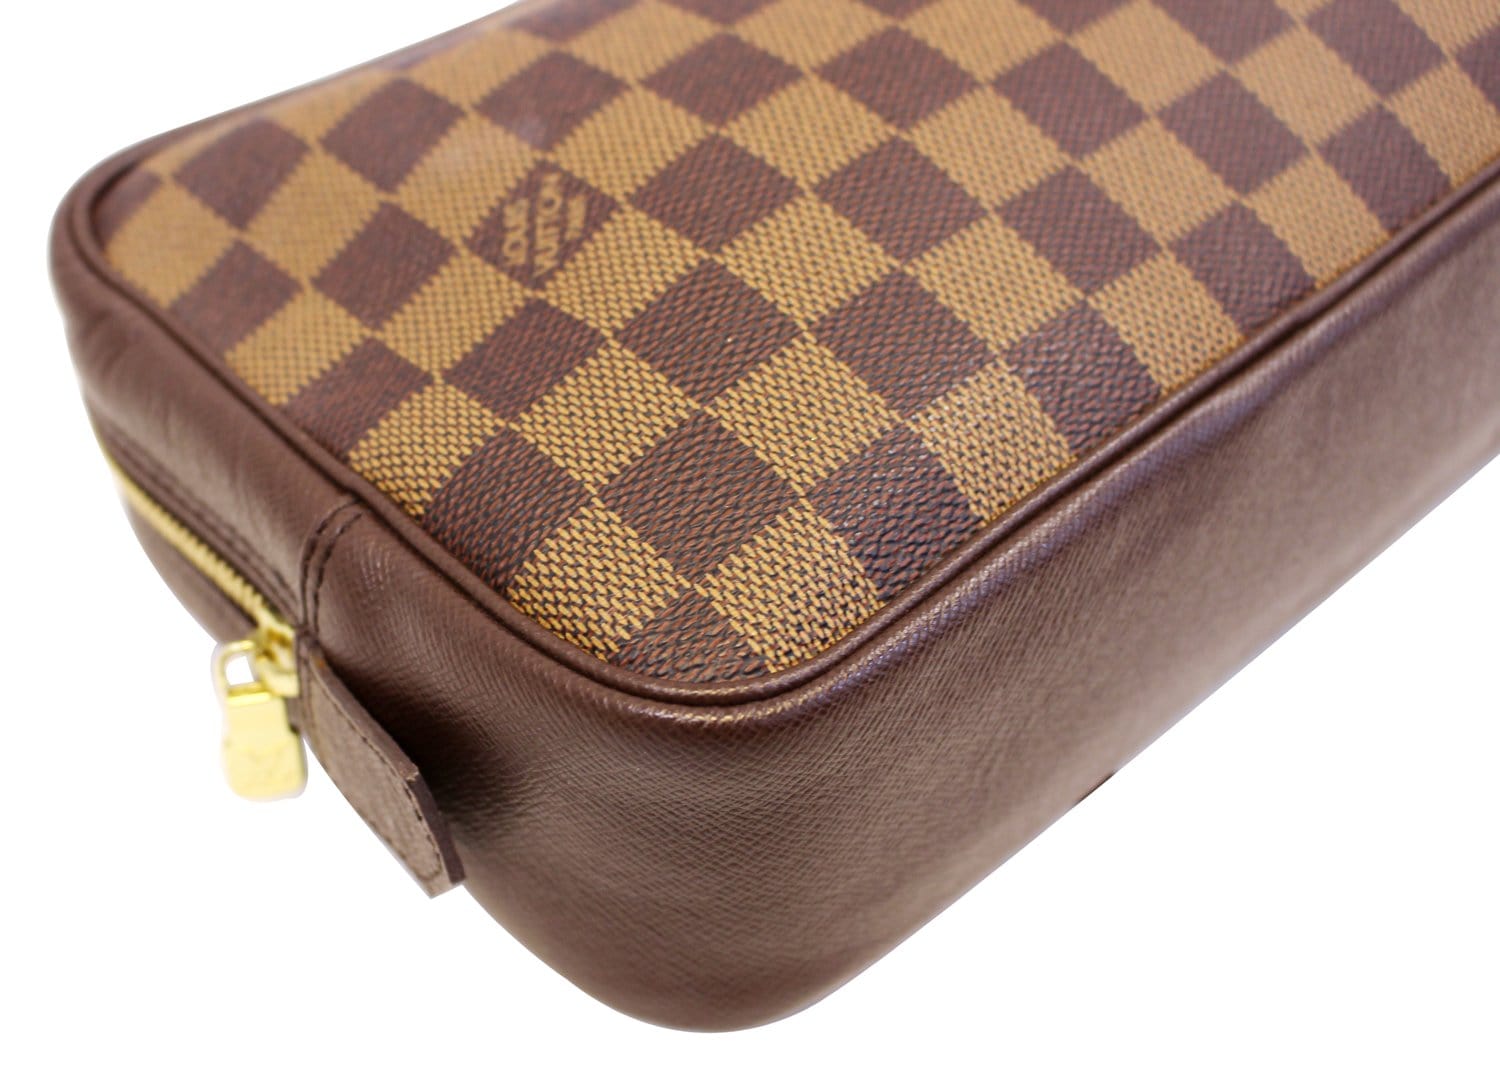 Best Louis Vuitton Toiletry Bag for sale in Topeka, Kansas for 2023